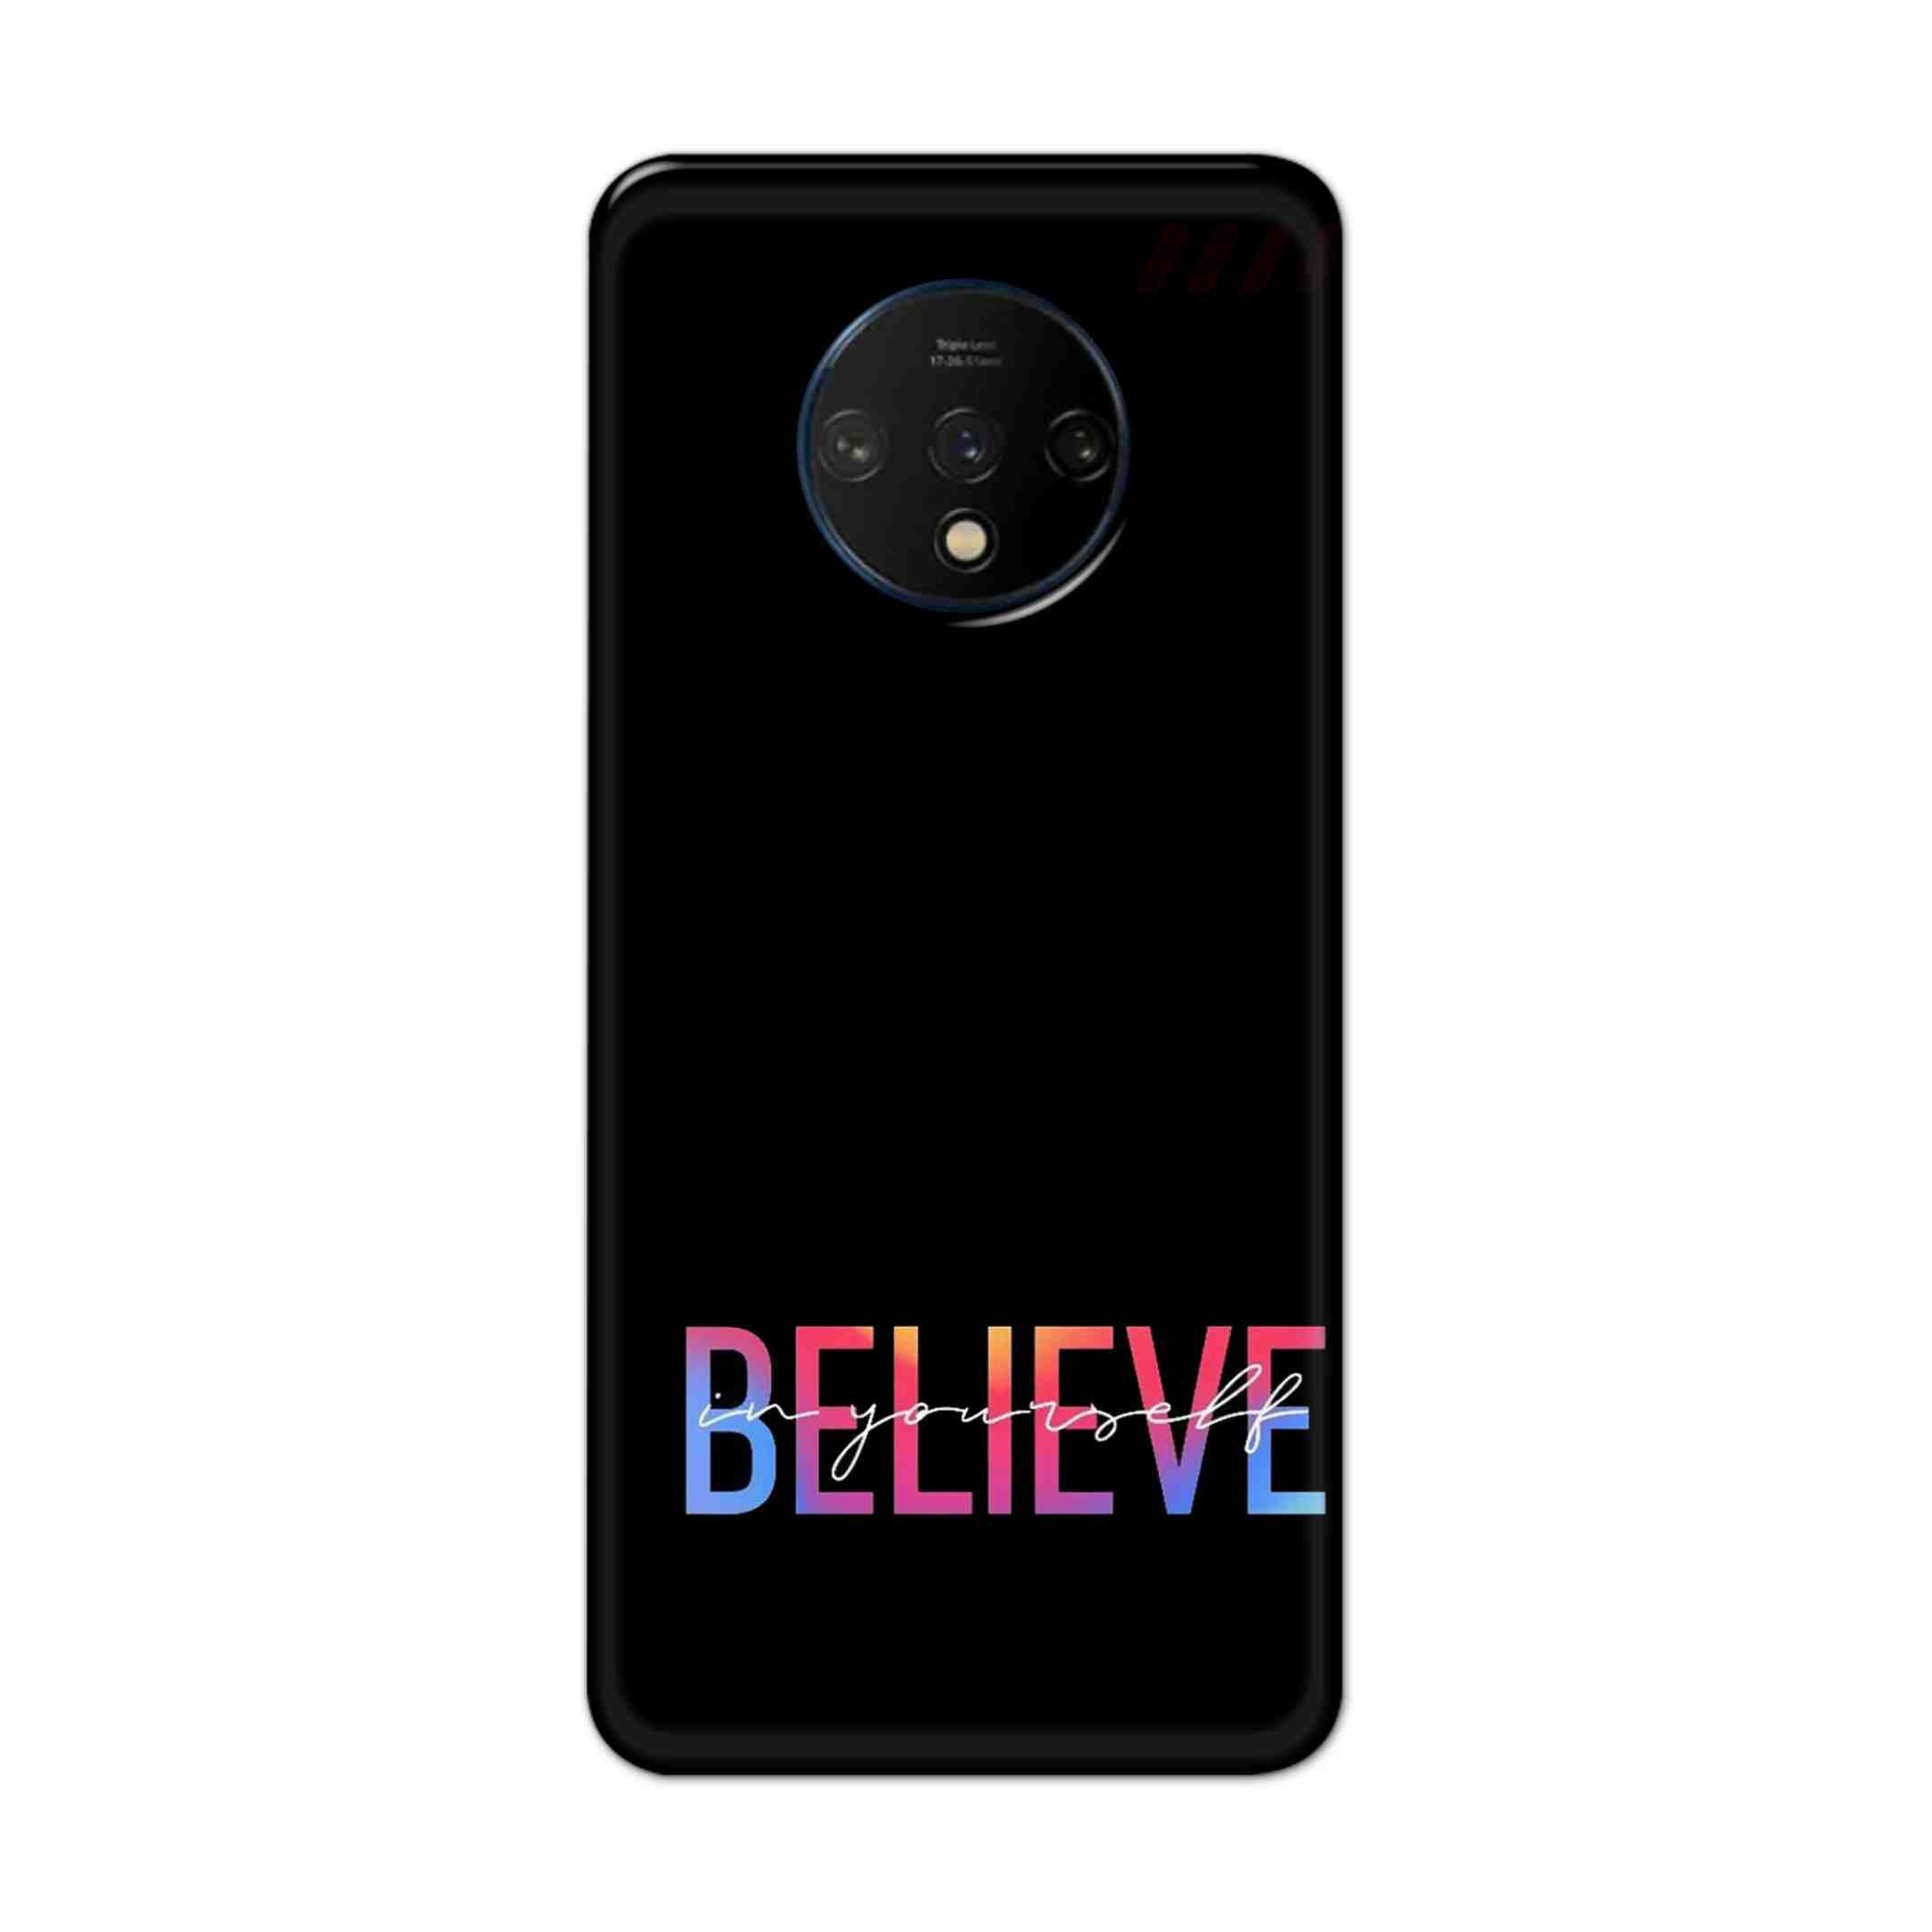 Buy Believe Hard Back Mobile Phone Case Cover For OnePlus 7T Online